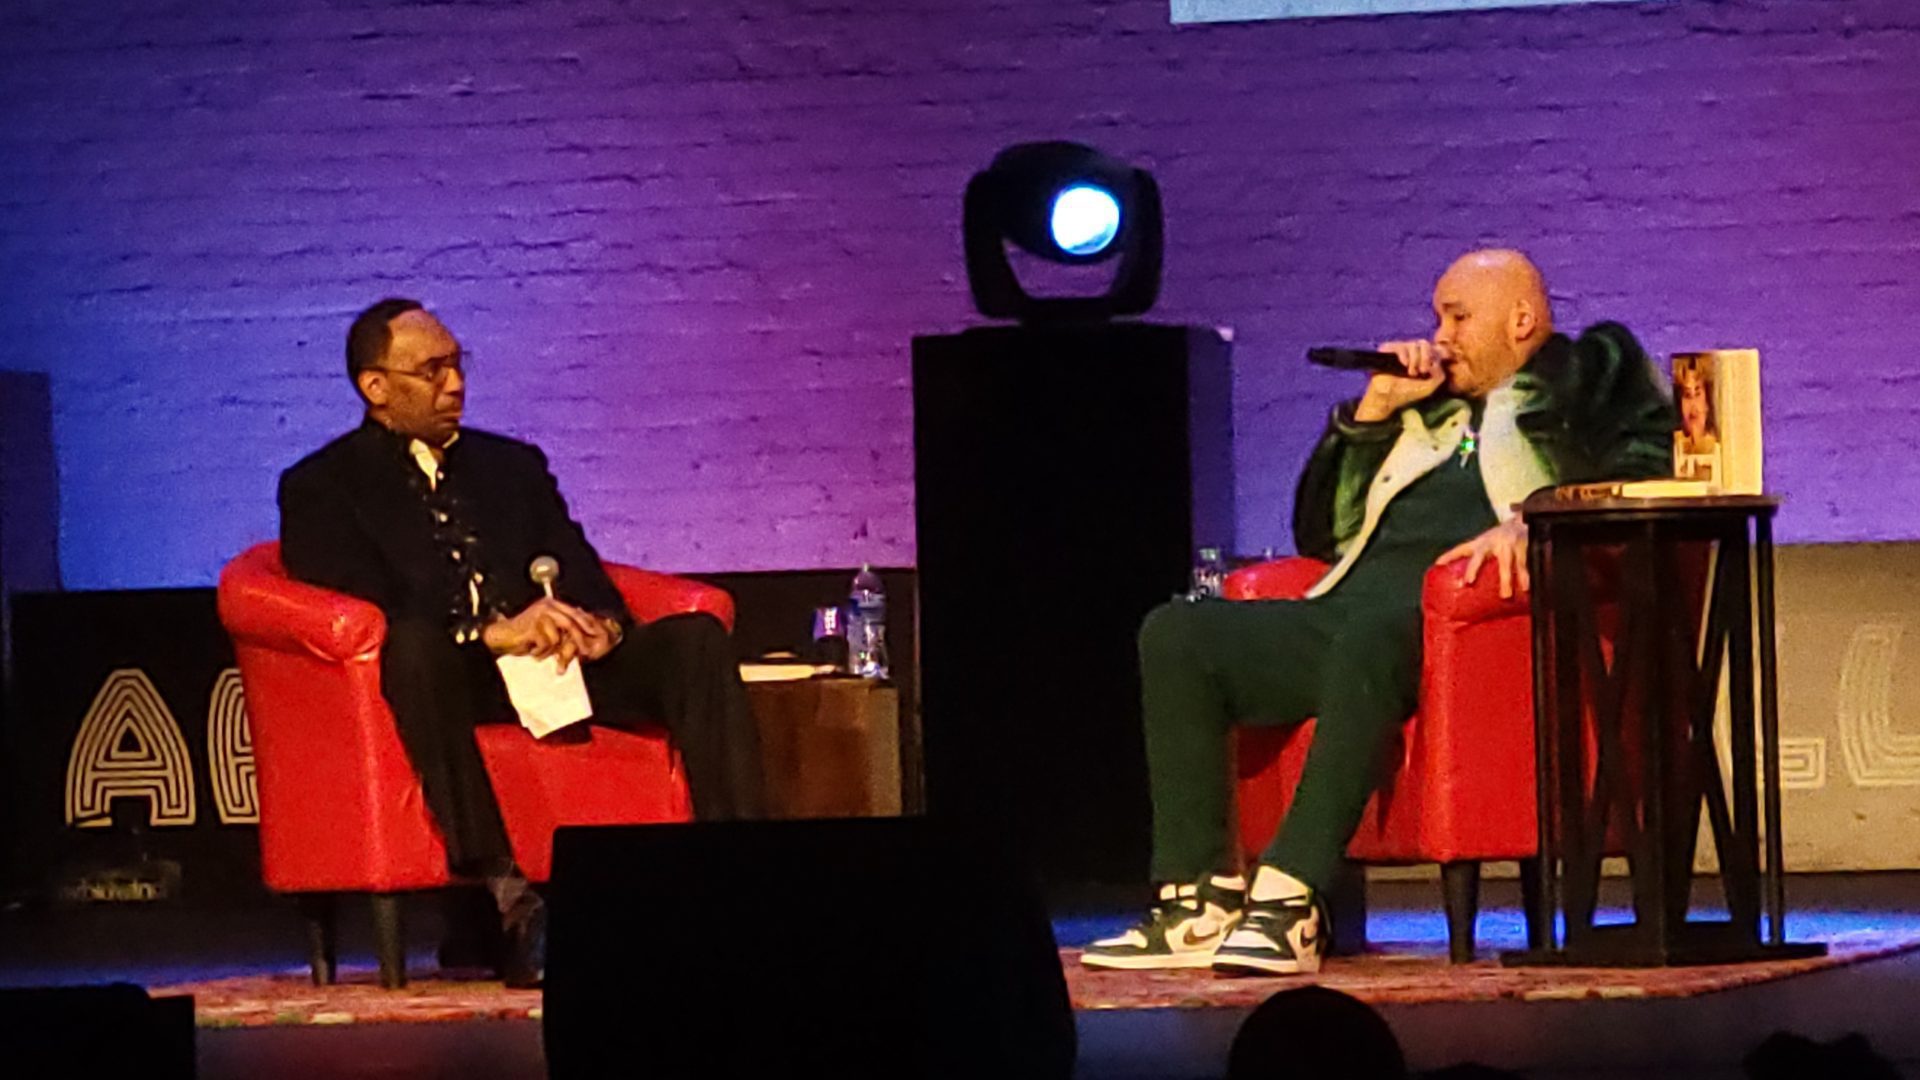 Fat Joe discusses his memoir with Stephen A, Smith. (Photo by Derrel Jazz Johnson for rolling out)